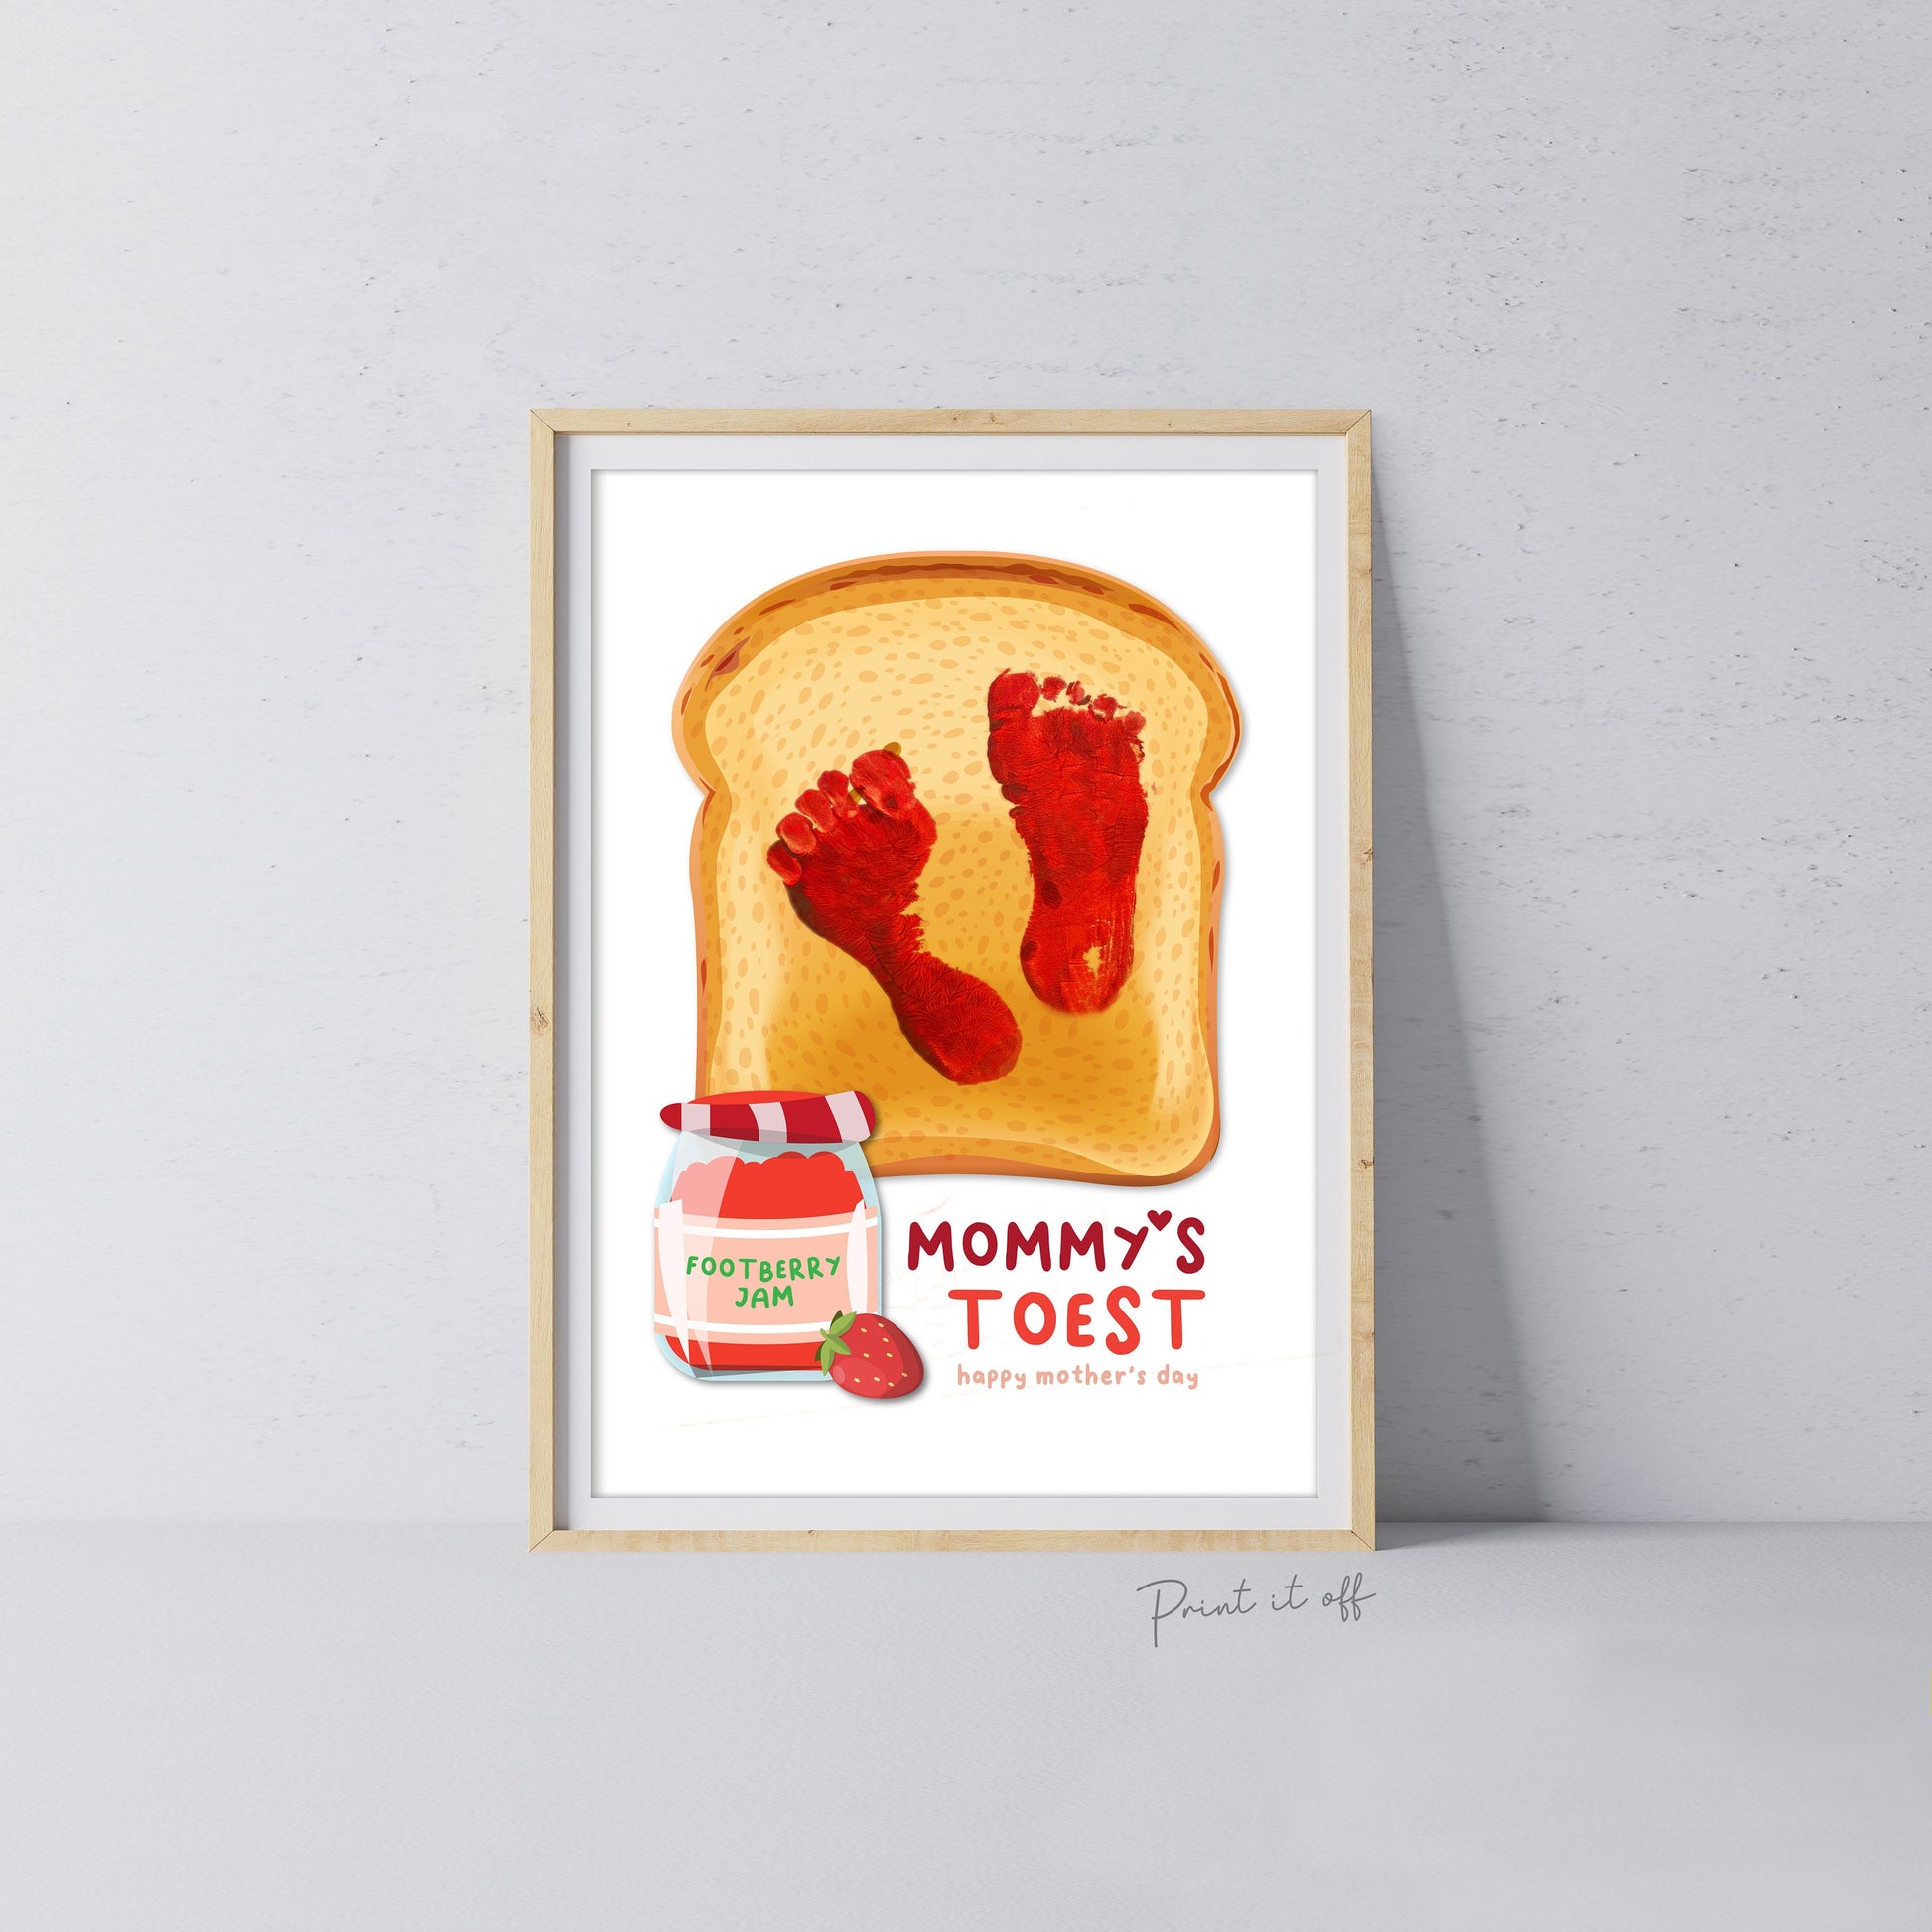 Mommy&#39;s Toest / Happy Mother&#39;s Day Mom / Footprint Feet Toes Art / Keepsake Baby Toddler Gift Card Craft Diy / Footprint PRINT IT OFF